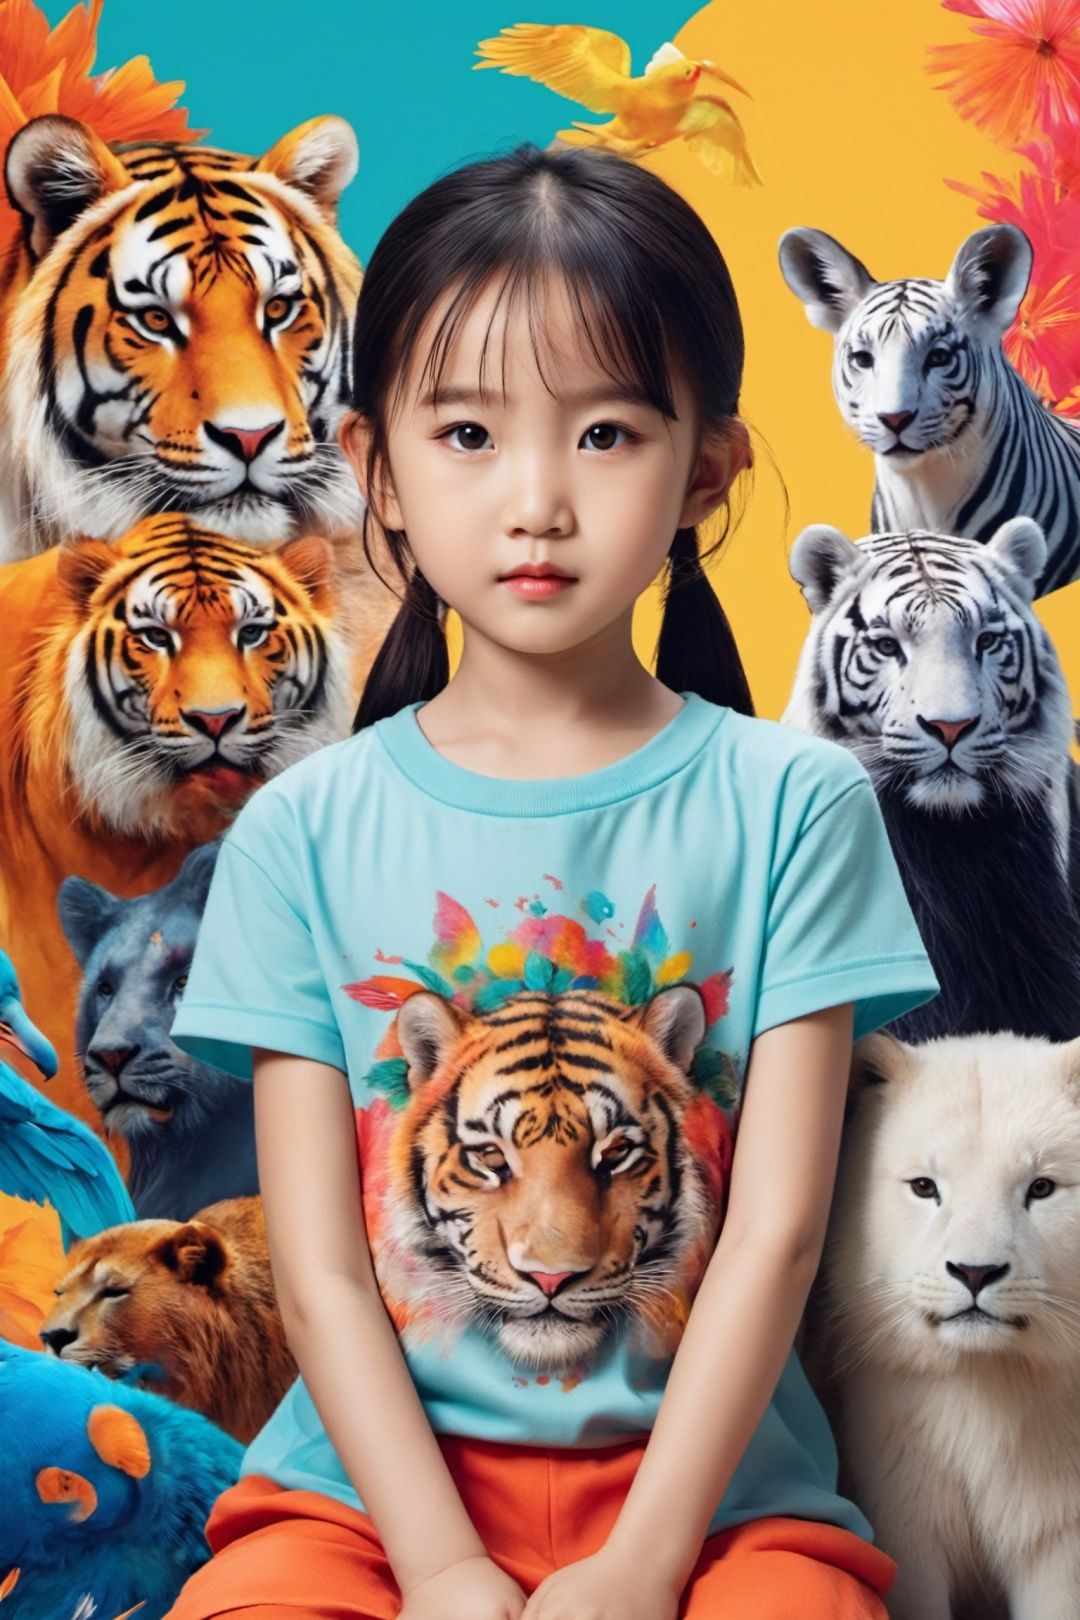 Social art, colorful backgrounds, splashing colors. A 6-year-old Chinese girl with exquisite facial features, half body portrait, tattoos, surrounded by animals, movie perspective, advertising style, girl, half body photos,